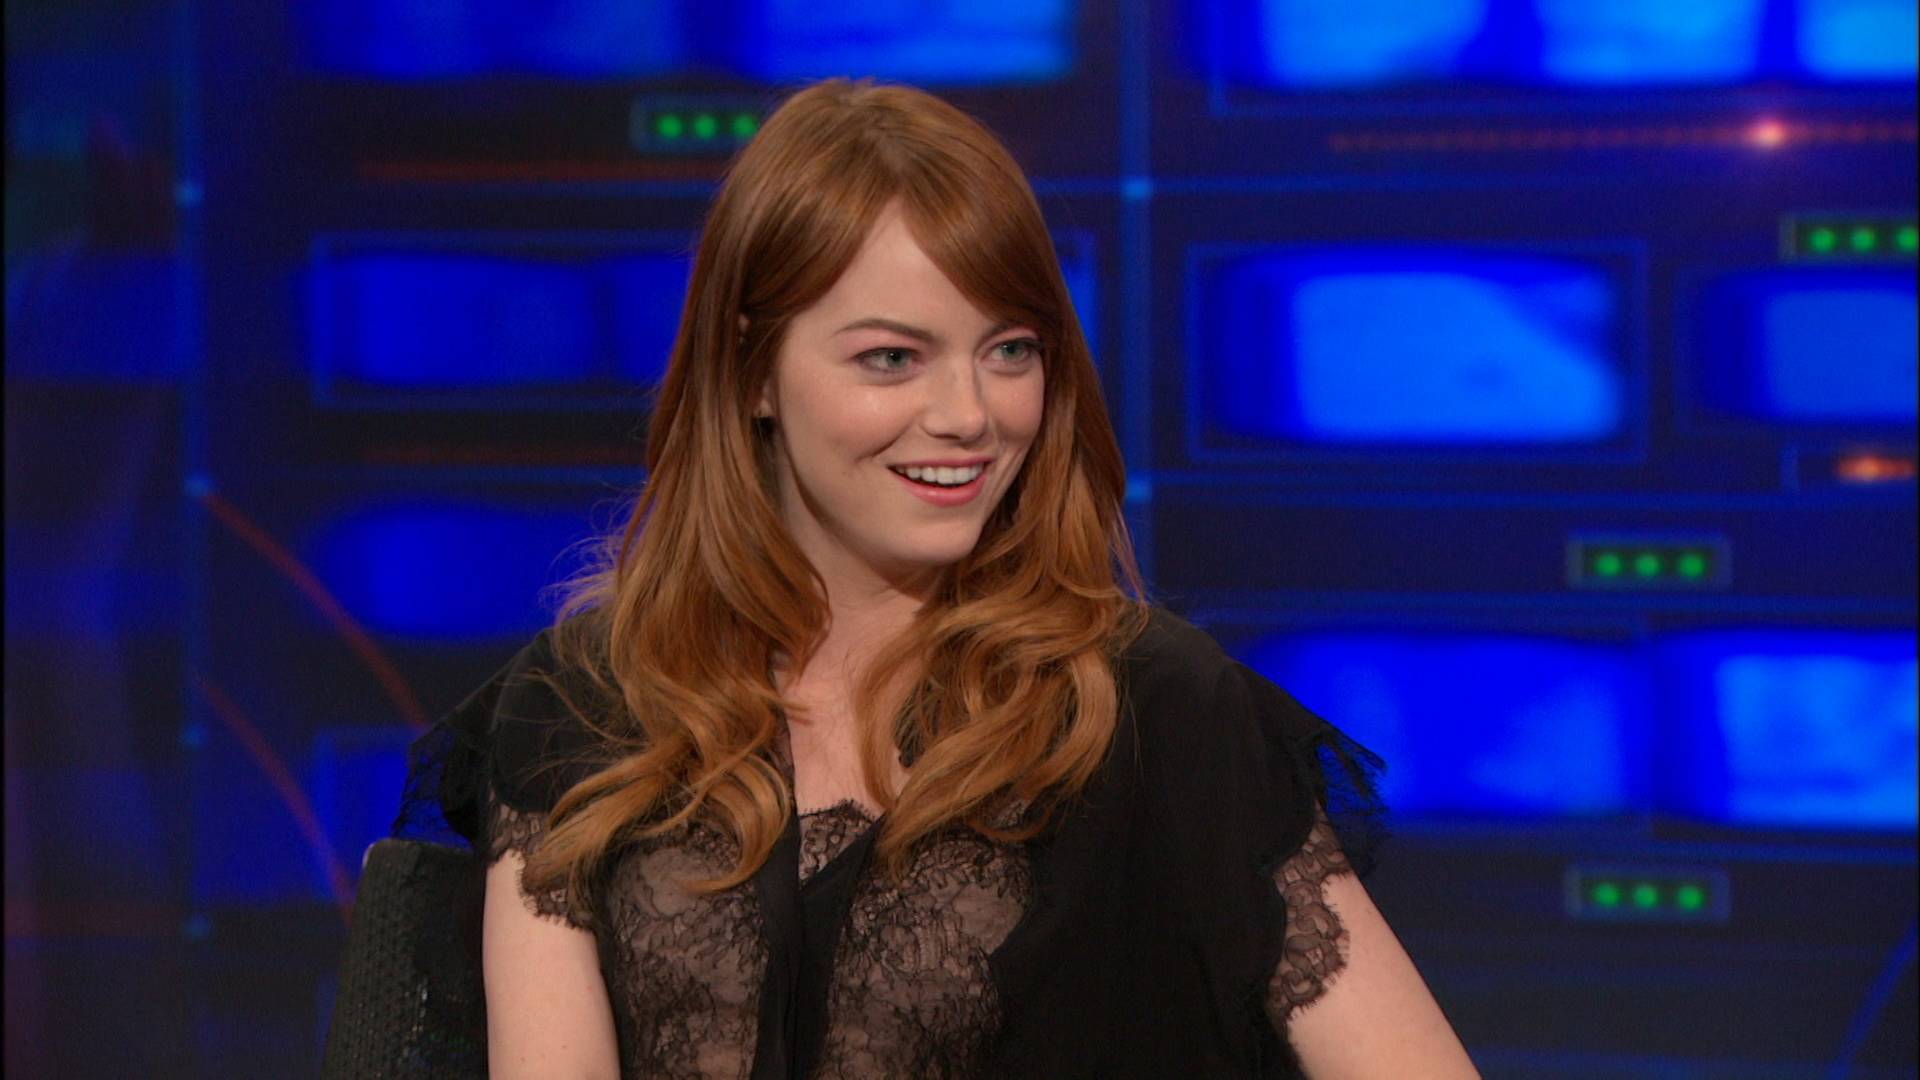 emma stone daily on X: Emma Stone shooting the campaign for